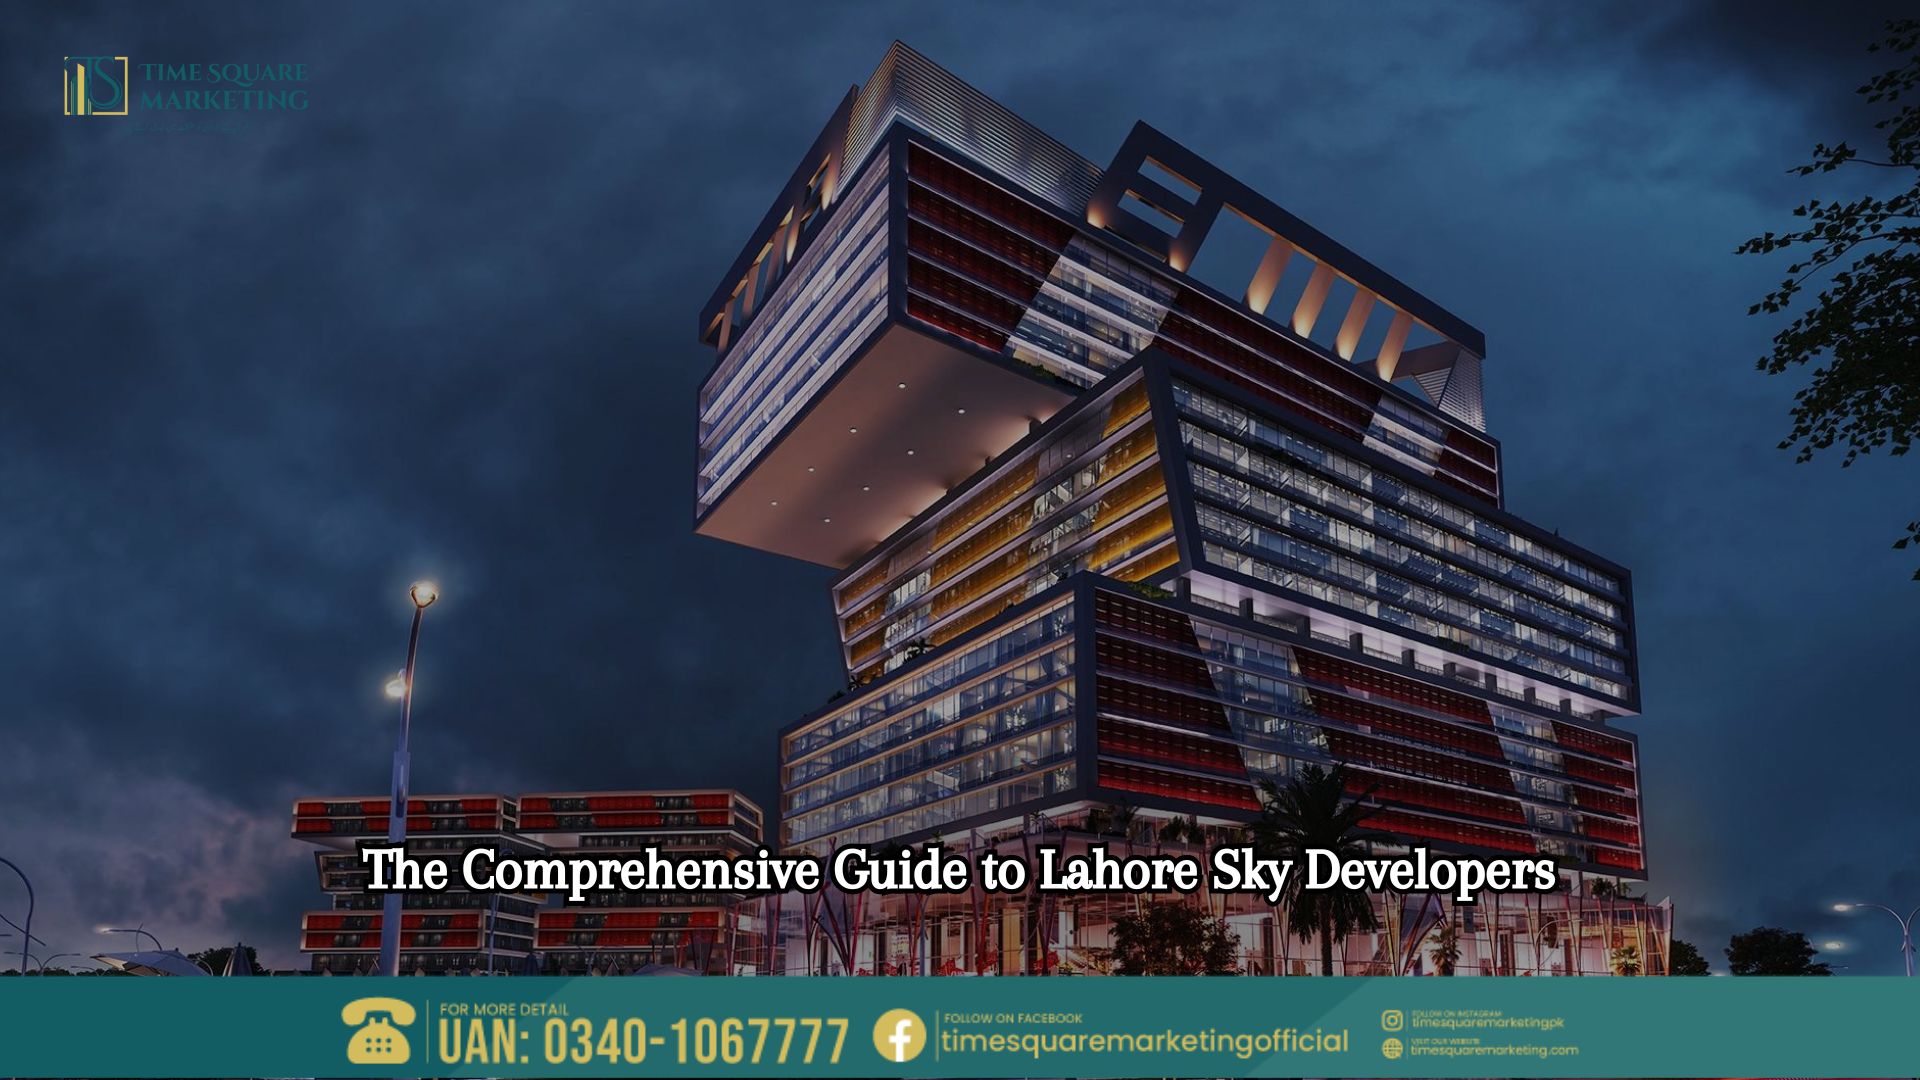 The Comprehensive Guide to Lahore Sky Developers